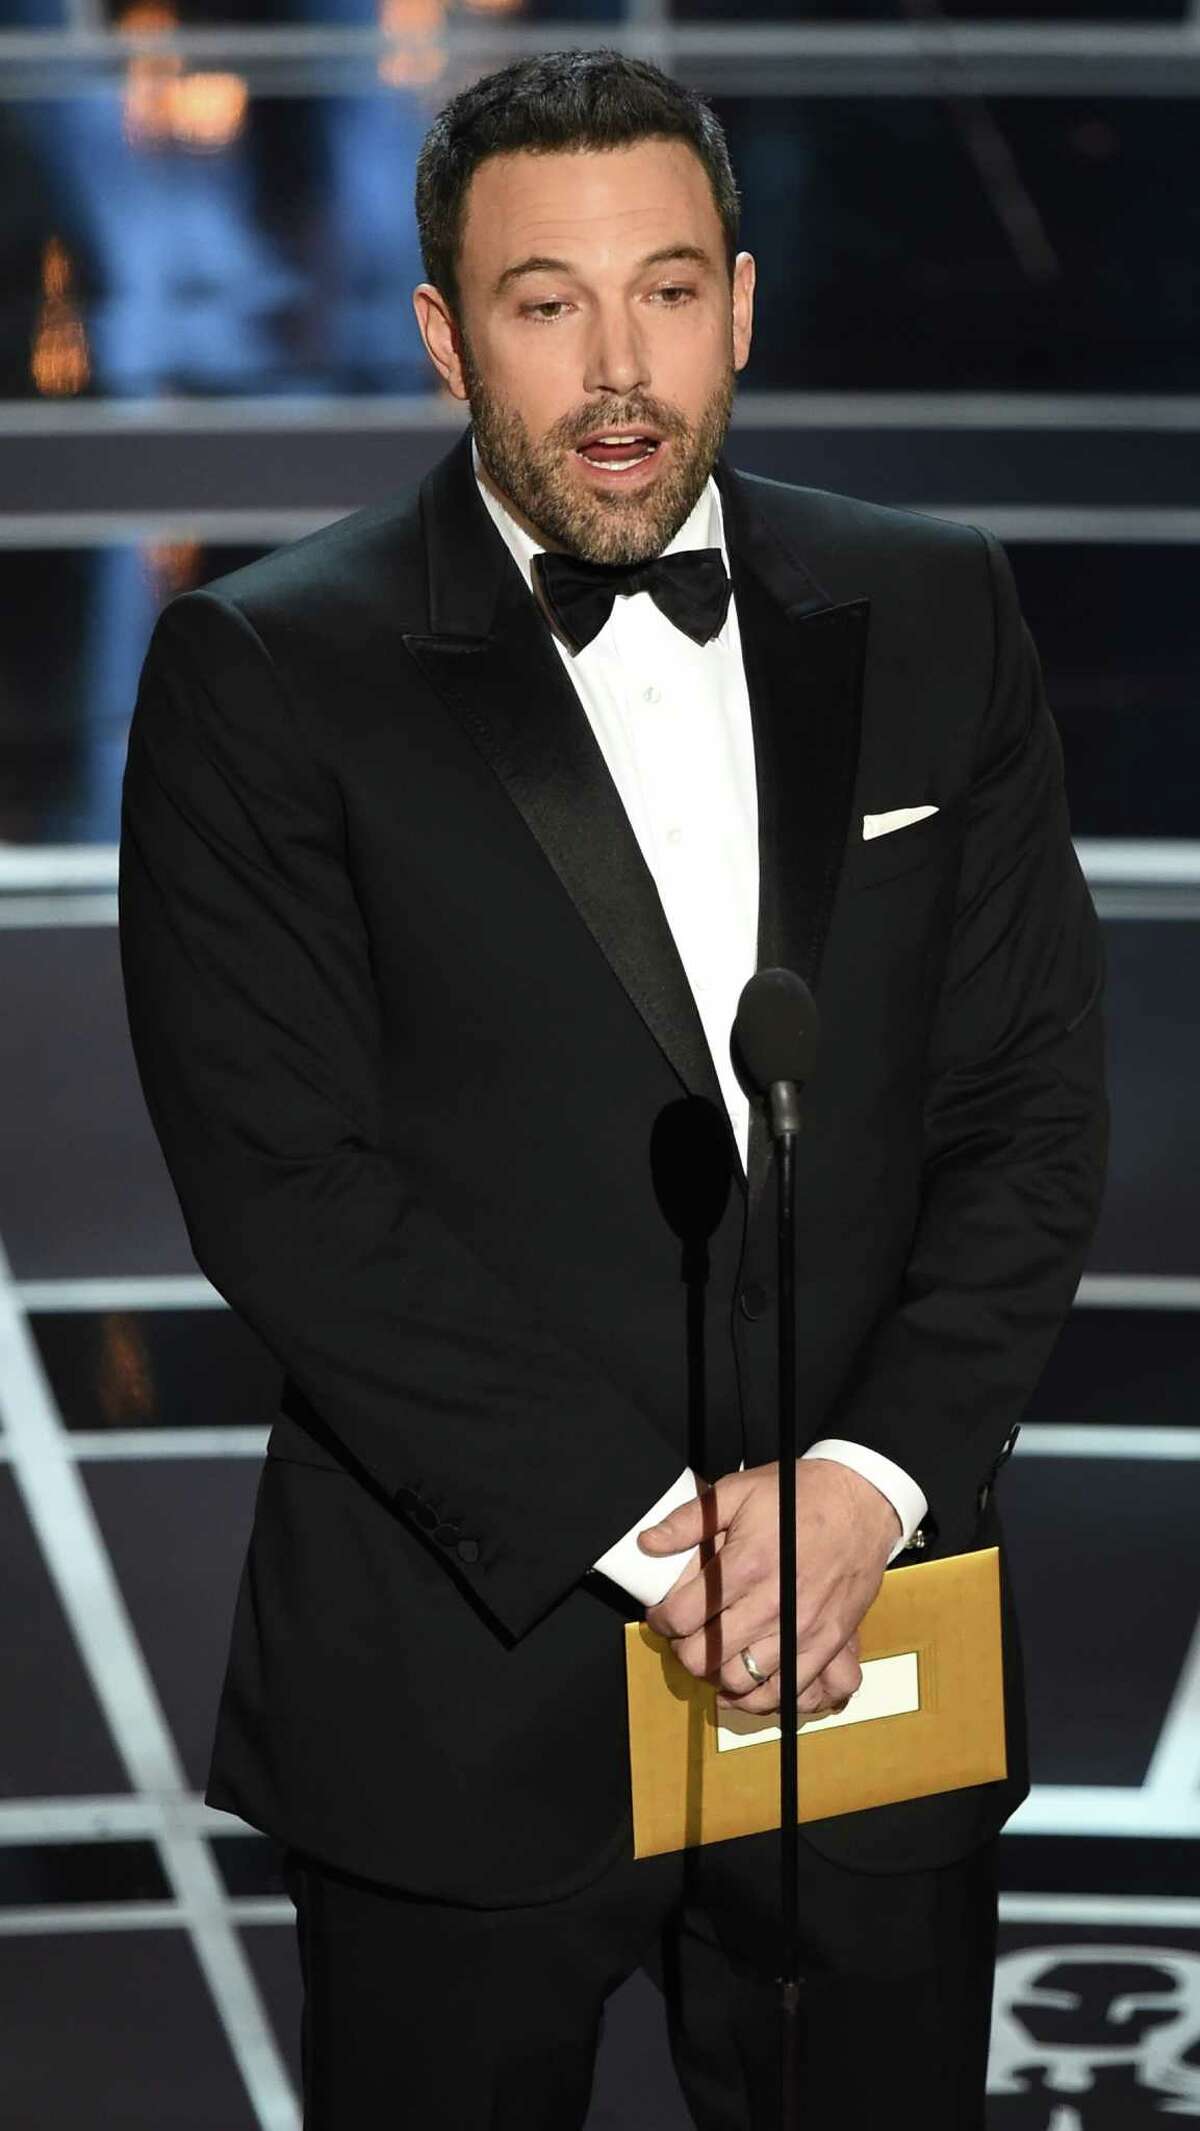 (FILES) This February 22, 2015 file photo shows Ben Affleck as he presents an award on stage at the 87th Oscars in Hollywood, California. Ben Affleck says he was "embarrassed" upon learning he had slaveholding ancestors, and regrets asking US television producers to censor that fact from a program about his family's past. Affleck was featured late last year in the television program "Finding Your Roots," a nationally broadcast program that profiles the family histories of well-known Americans.The actor -- known as an ardent supporter of liberal causes -- was dismayed to learn that in addition to a forbear who was a Revolutionary War hero, he also had a long-ago relative who was a slavemaster. AFP PHOTO / Robyn BECKROBYN BECK/AFP/Getty Images